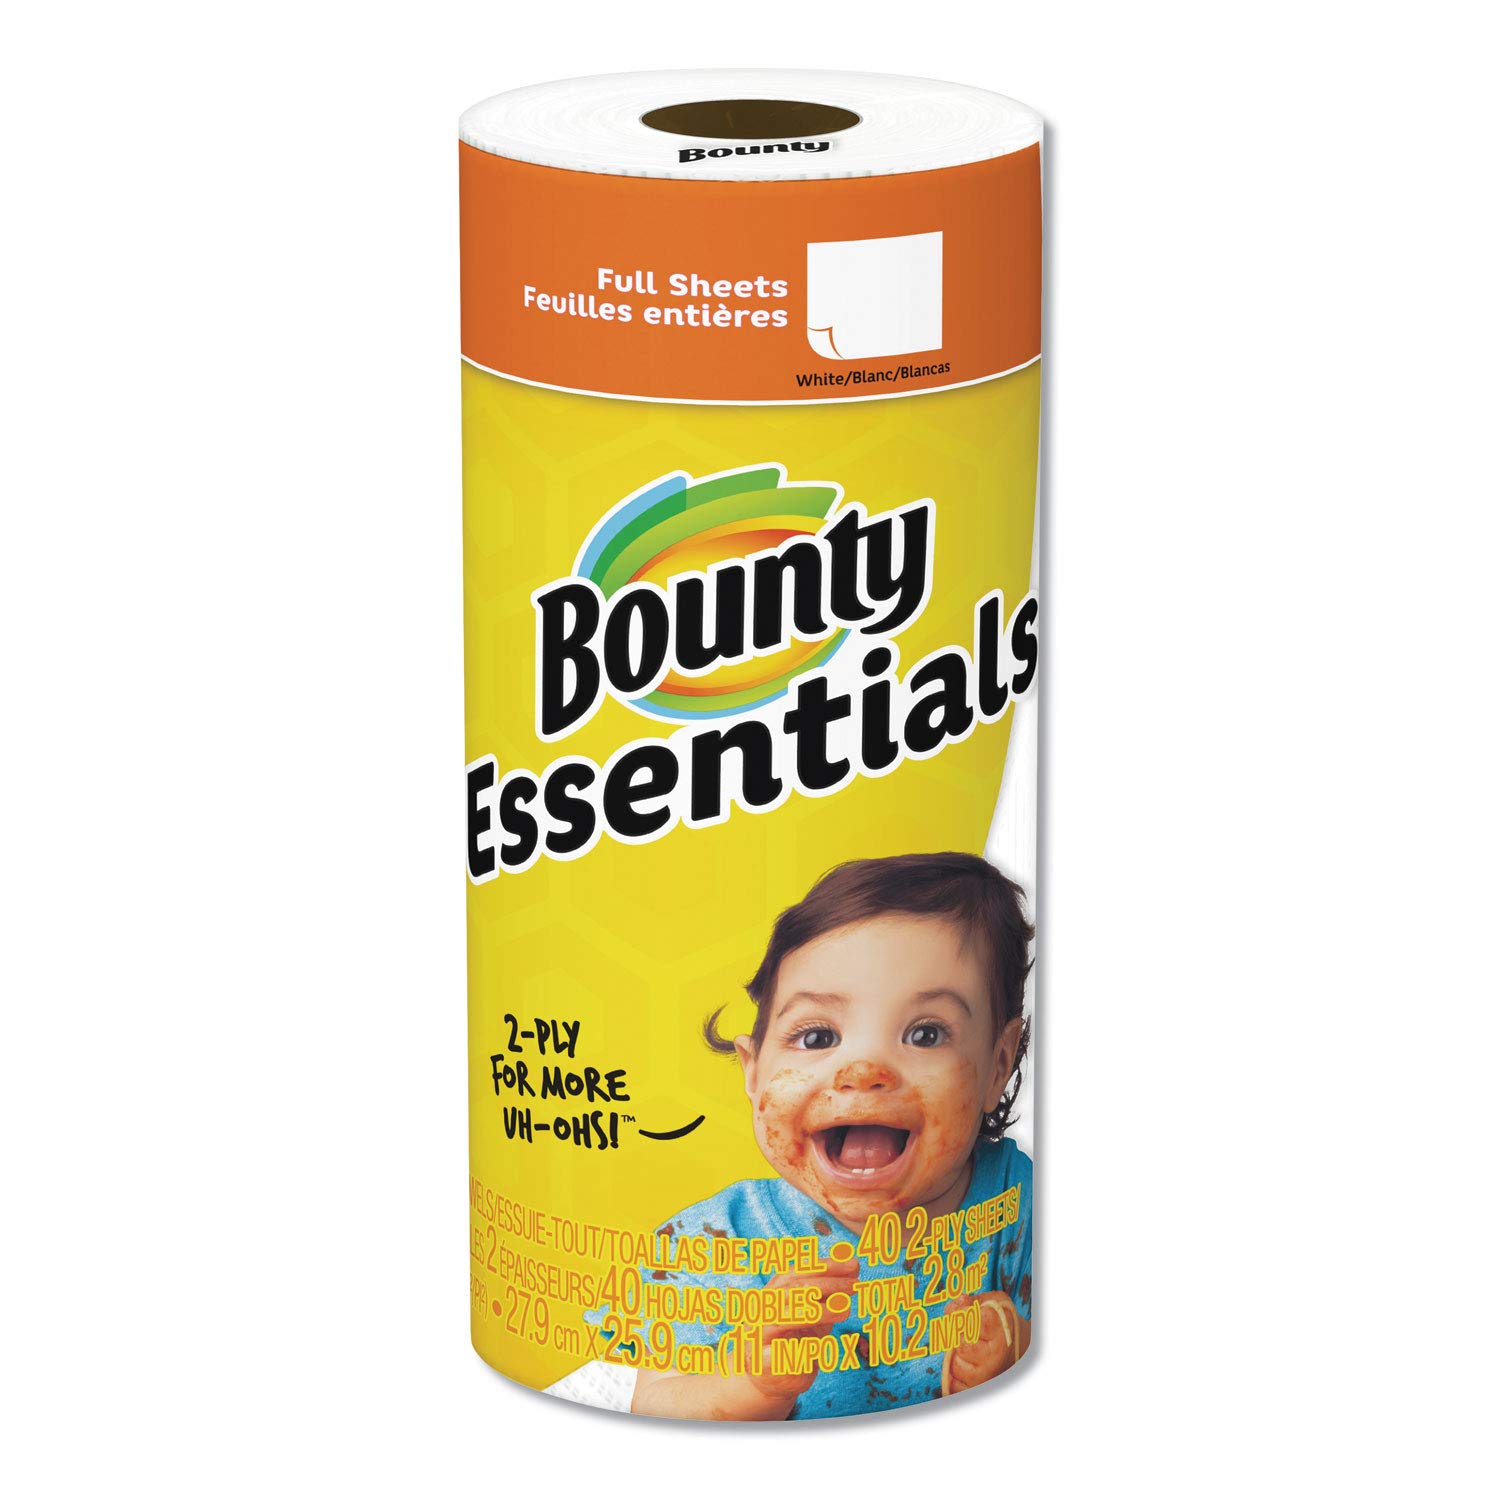 Bounty 2847069 Full Sheet Kitchen Rolls Paper Towels 2-Ply 40 Sheets/Roll